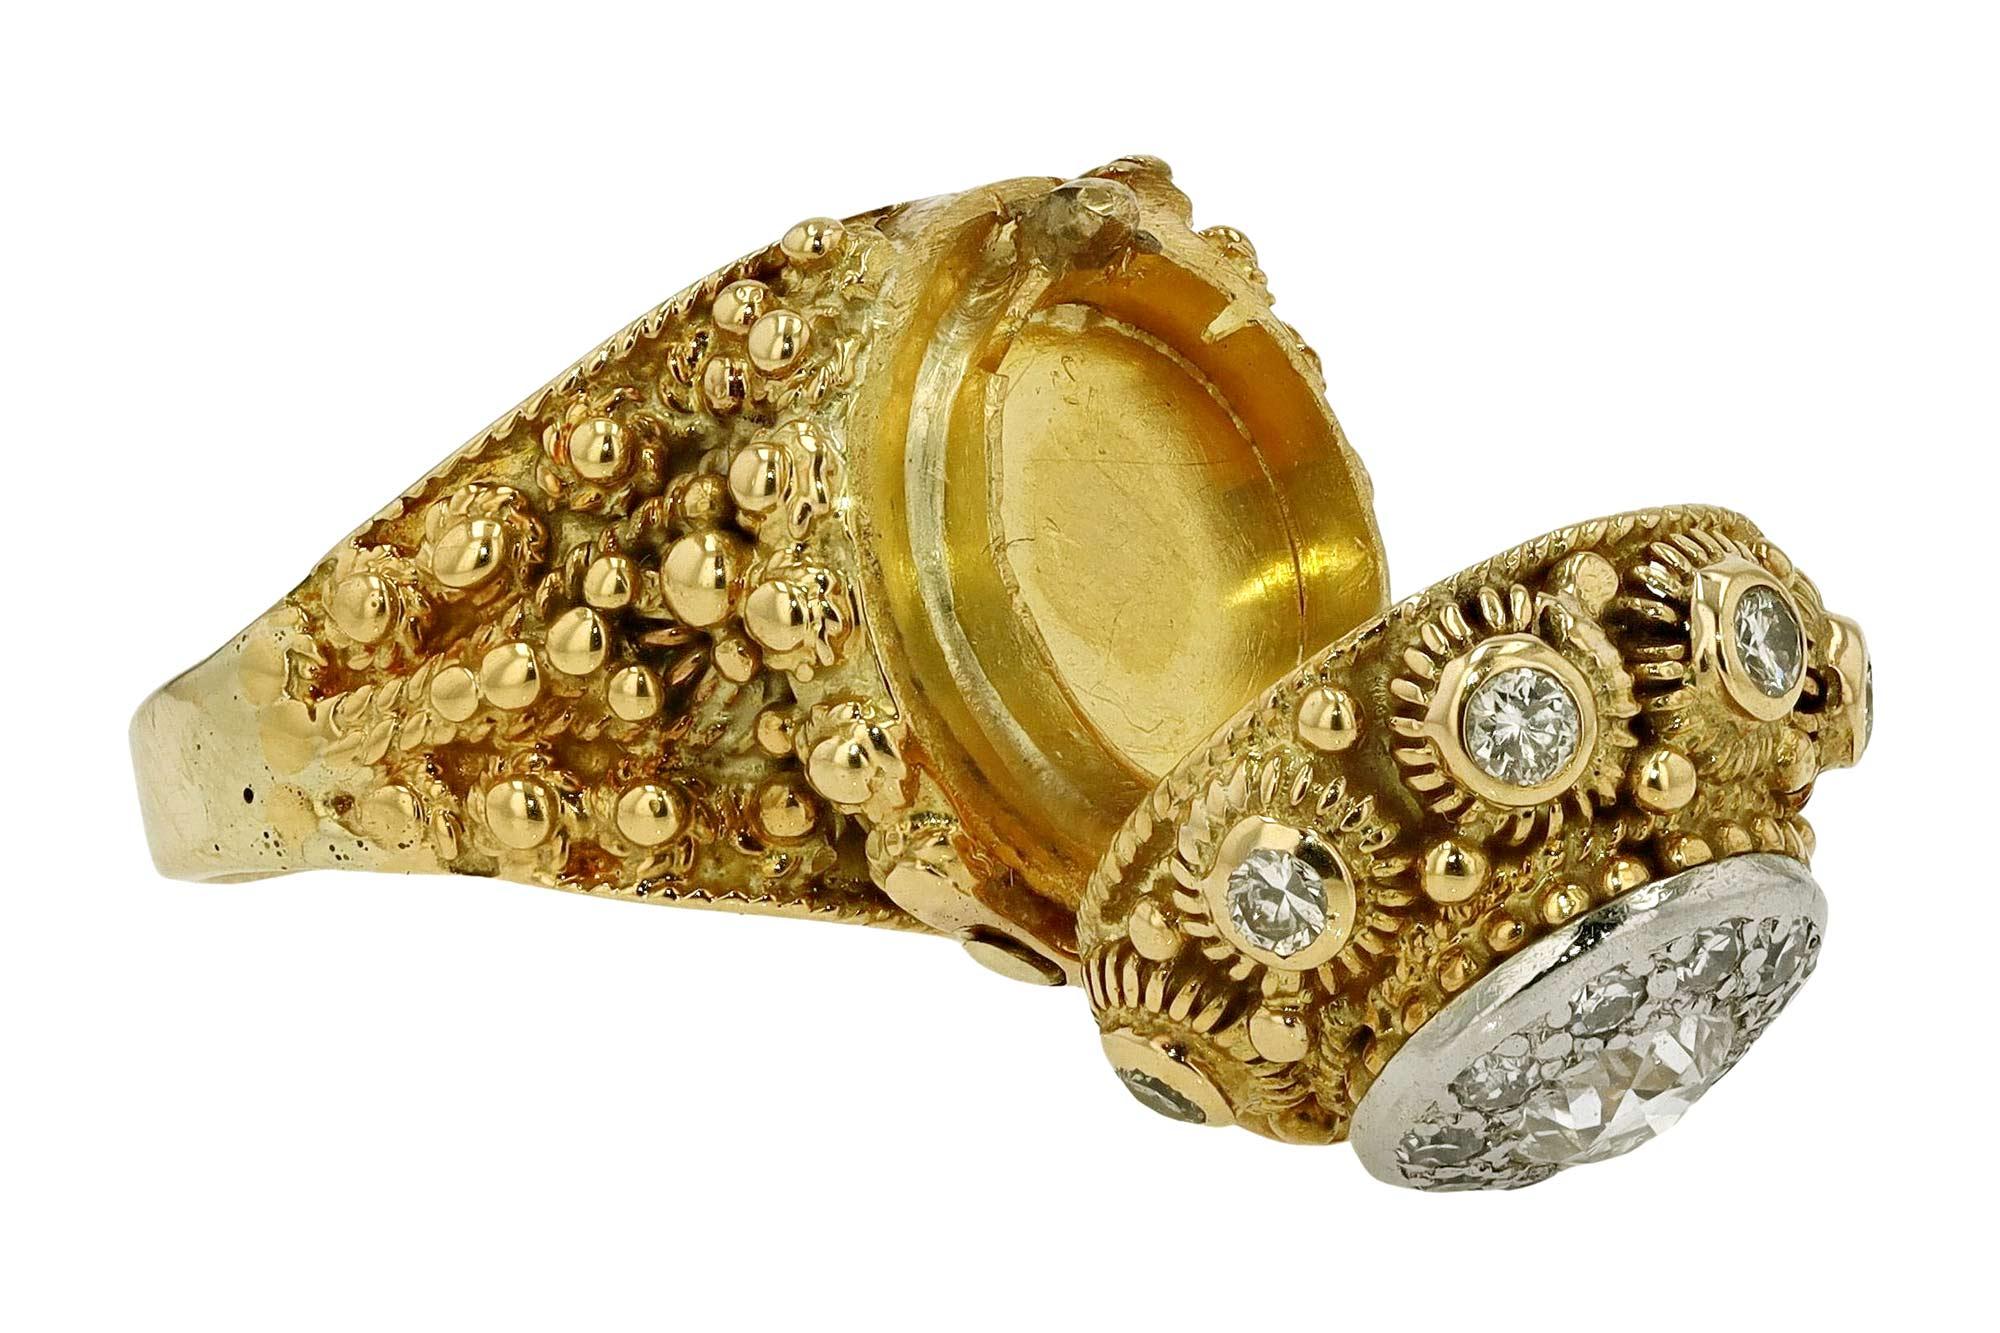 A brilliant and unique Etruscan Revival poison ring from the Victorian era. Made of 18 karat yellow gold with a prominent and stately design, featuring detailed beading and granulation, including an ingenious disguised vessel. Centered by a gleaming